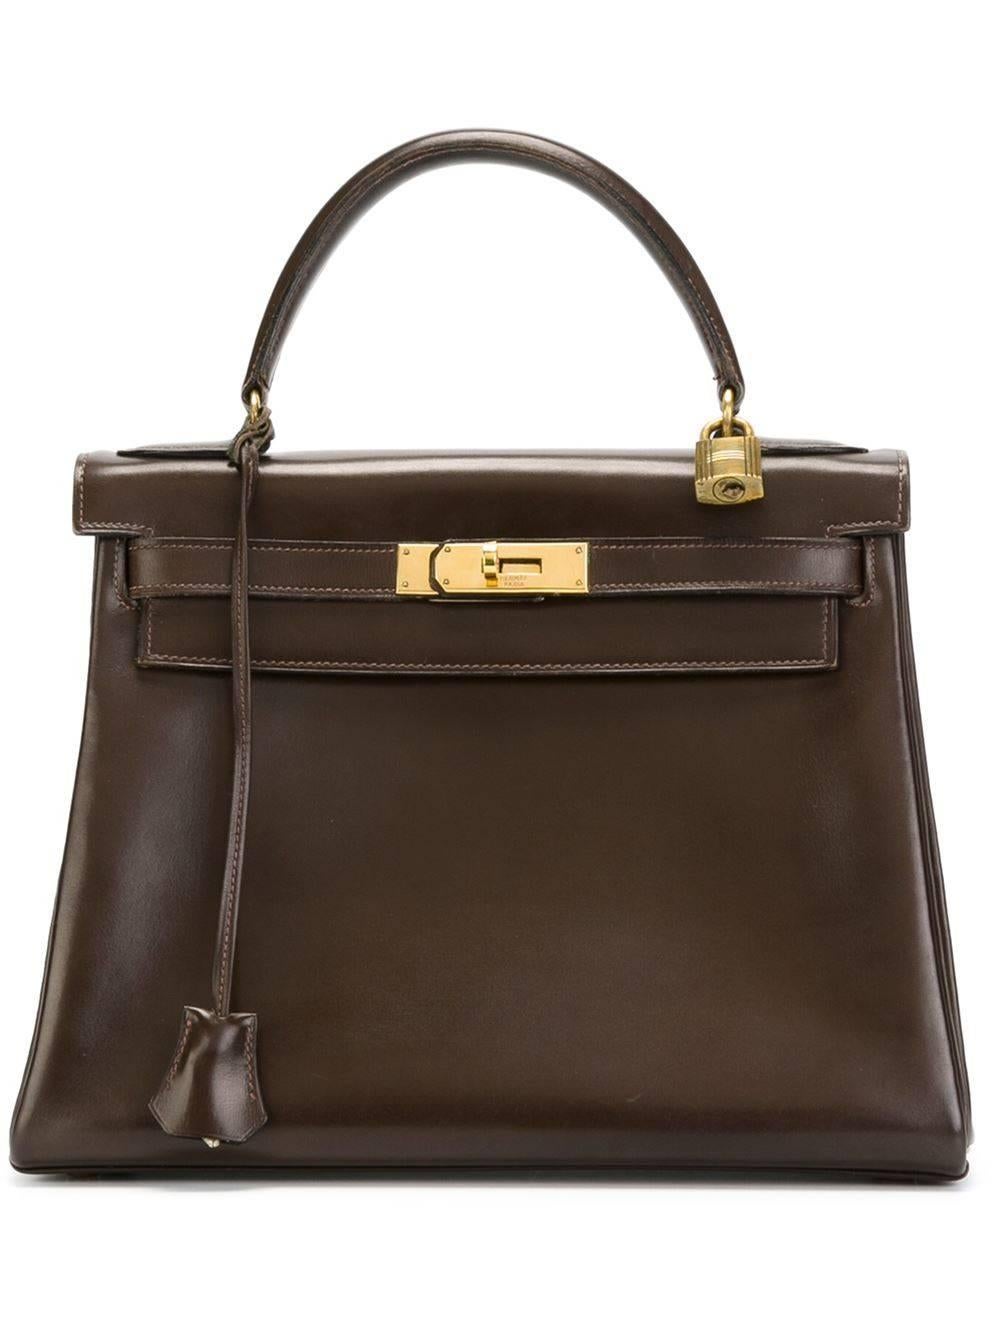 Hermès Rarity. The Kelly handbag of 1958. In exceptional condition. See pictures. Fabulous brown calf-box leather quality.  Gold hardware finishing. Marked Hermès Paris, letter N. 28 cm.  Delivered with the Hermès' Twiggy and the certificate.  